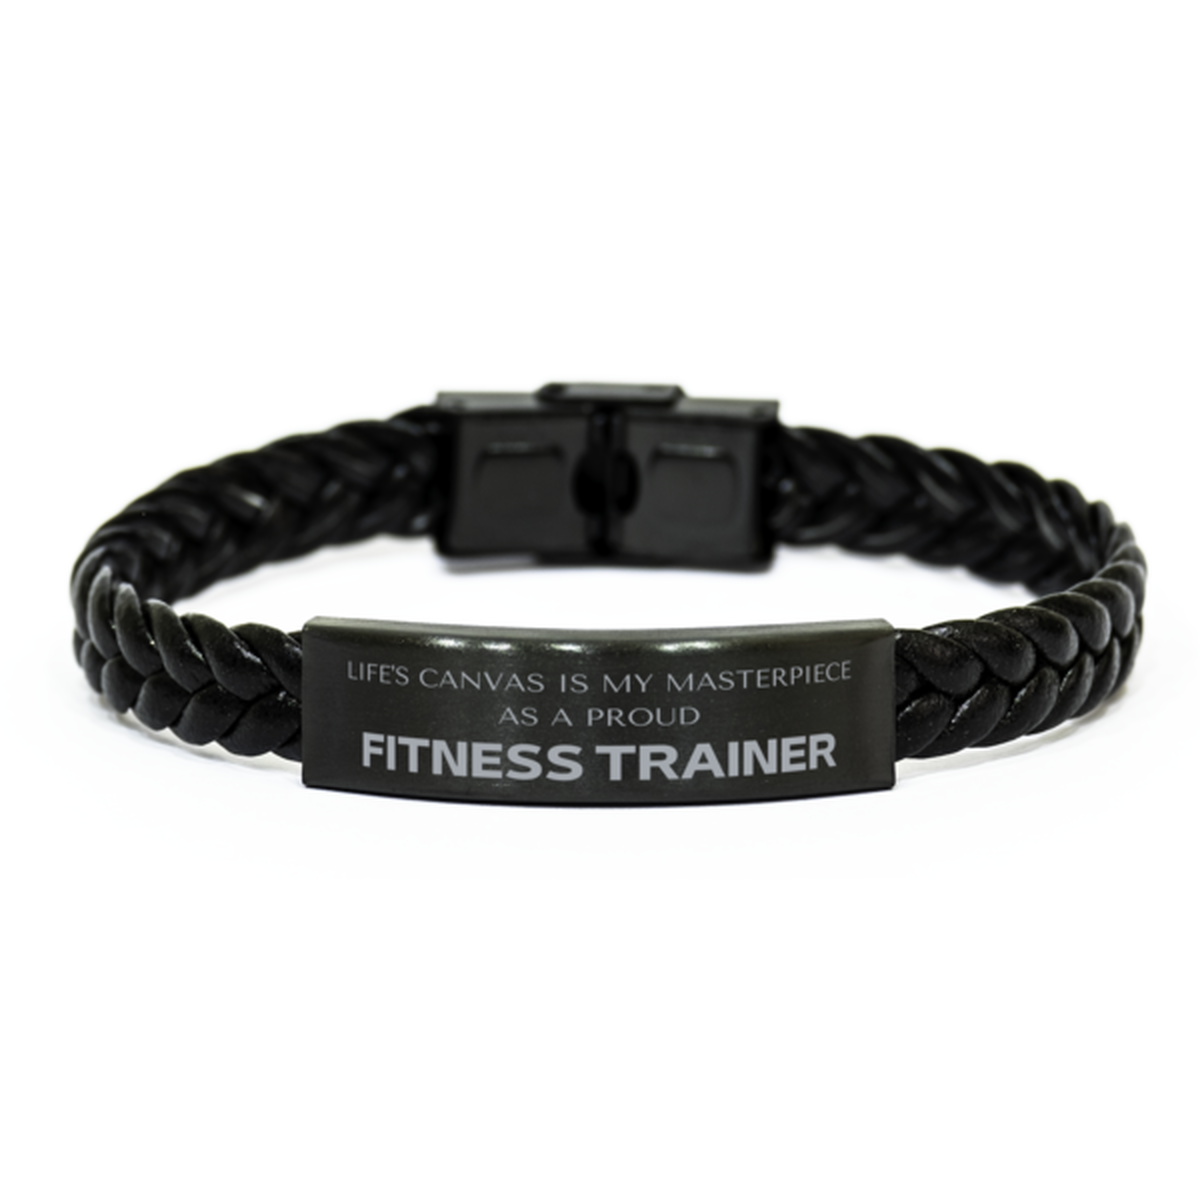 Proud Fitness Trainer Gifts, Life's canvas is my masterpiece, Epic Birthday Christmas Unique Braided Leather Bracelet For Fitness Trainer, Coworkers, Men, Women, Friends